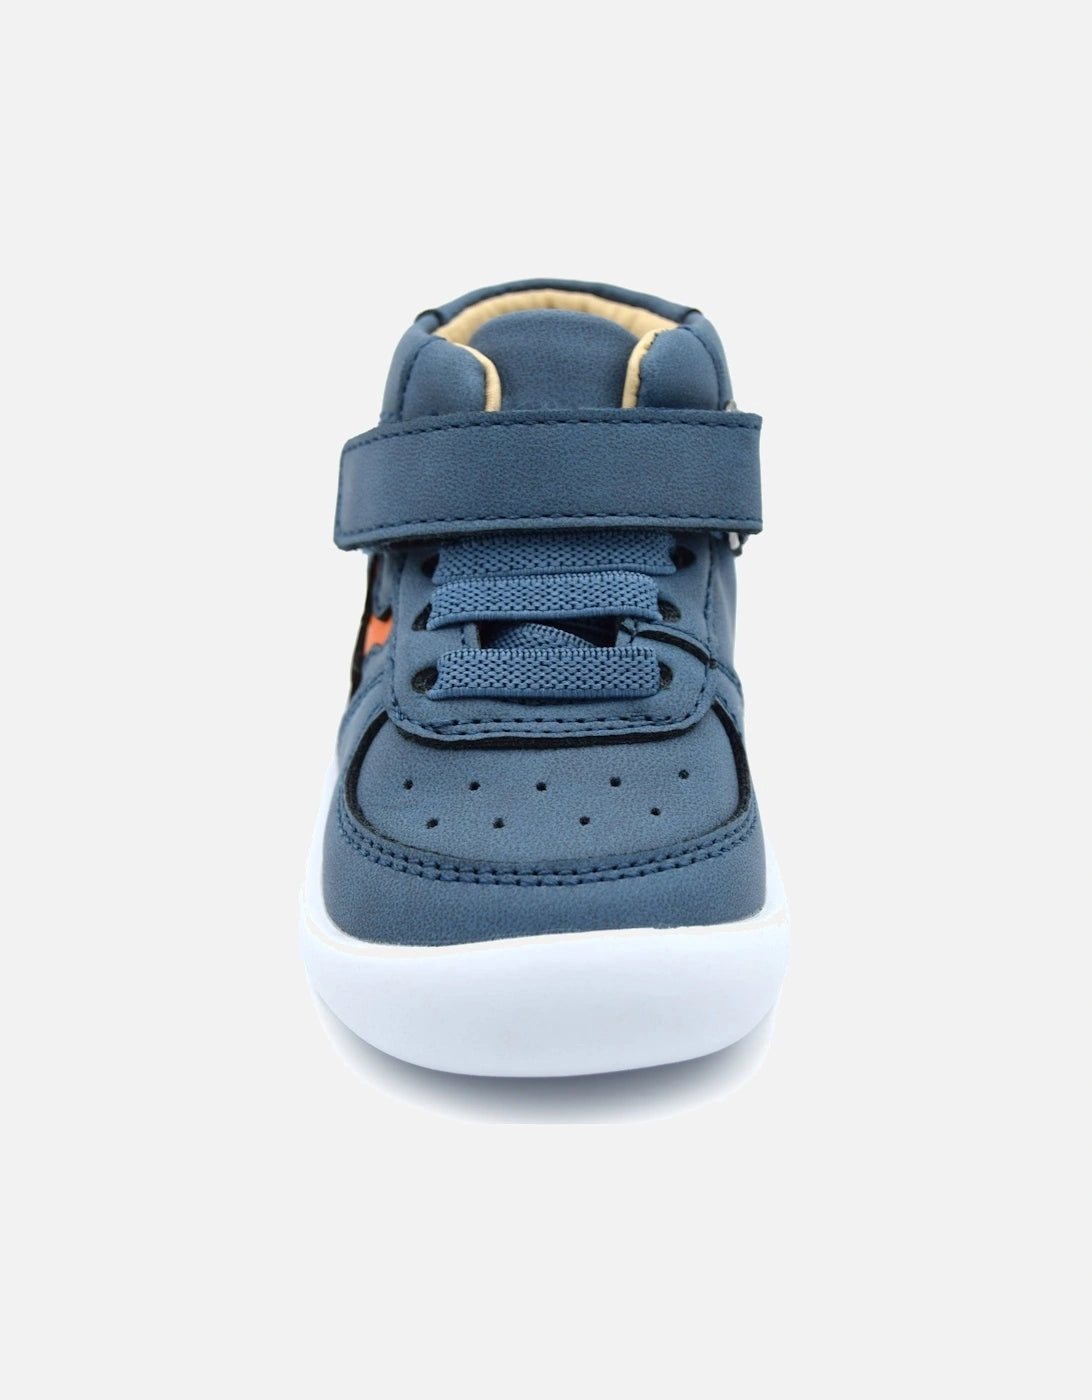 A boys mid-top shoe by Shoesme, style BF24SO14-B, in blue with orange motif on side. single velcro fastening and bungee lace. Front view.